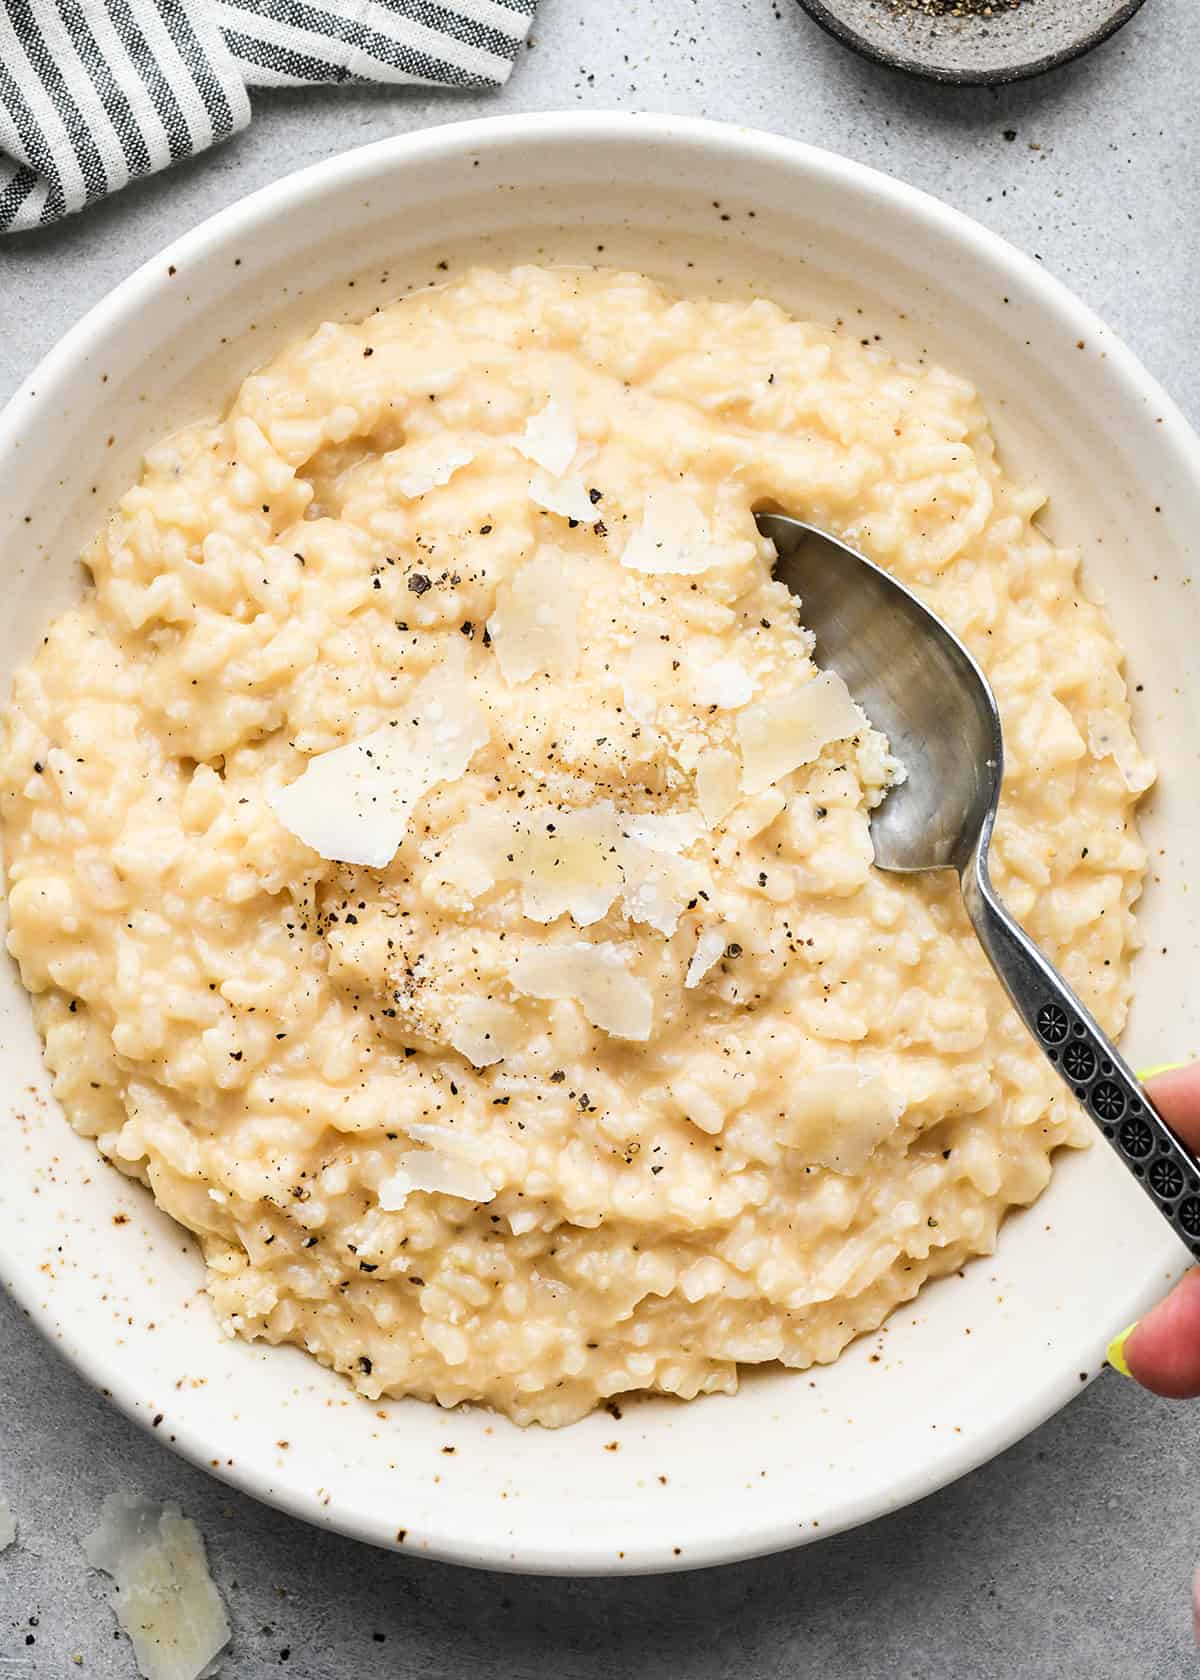 a spoon taking a scoop of risotto in a bowl